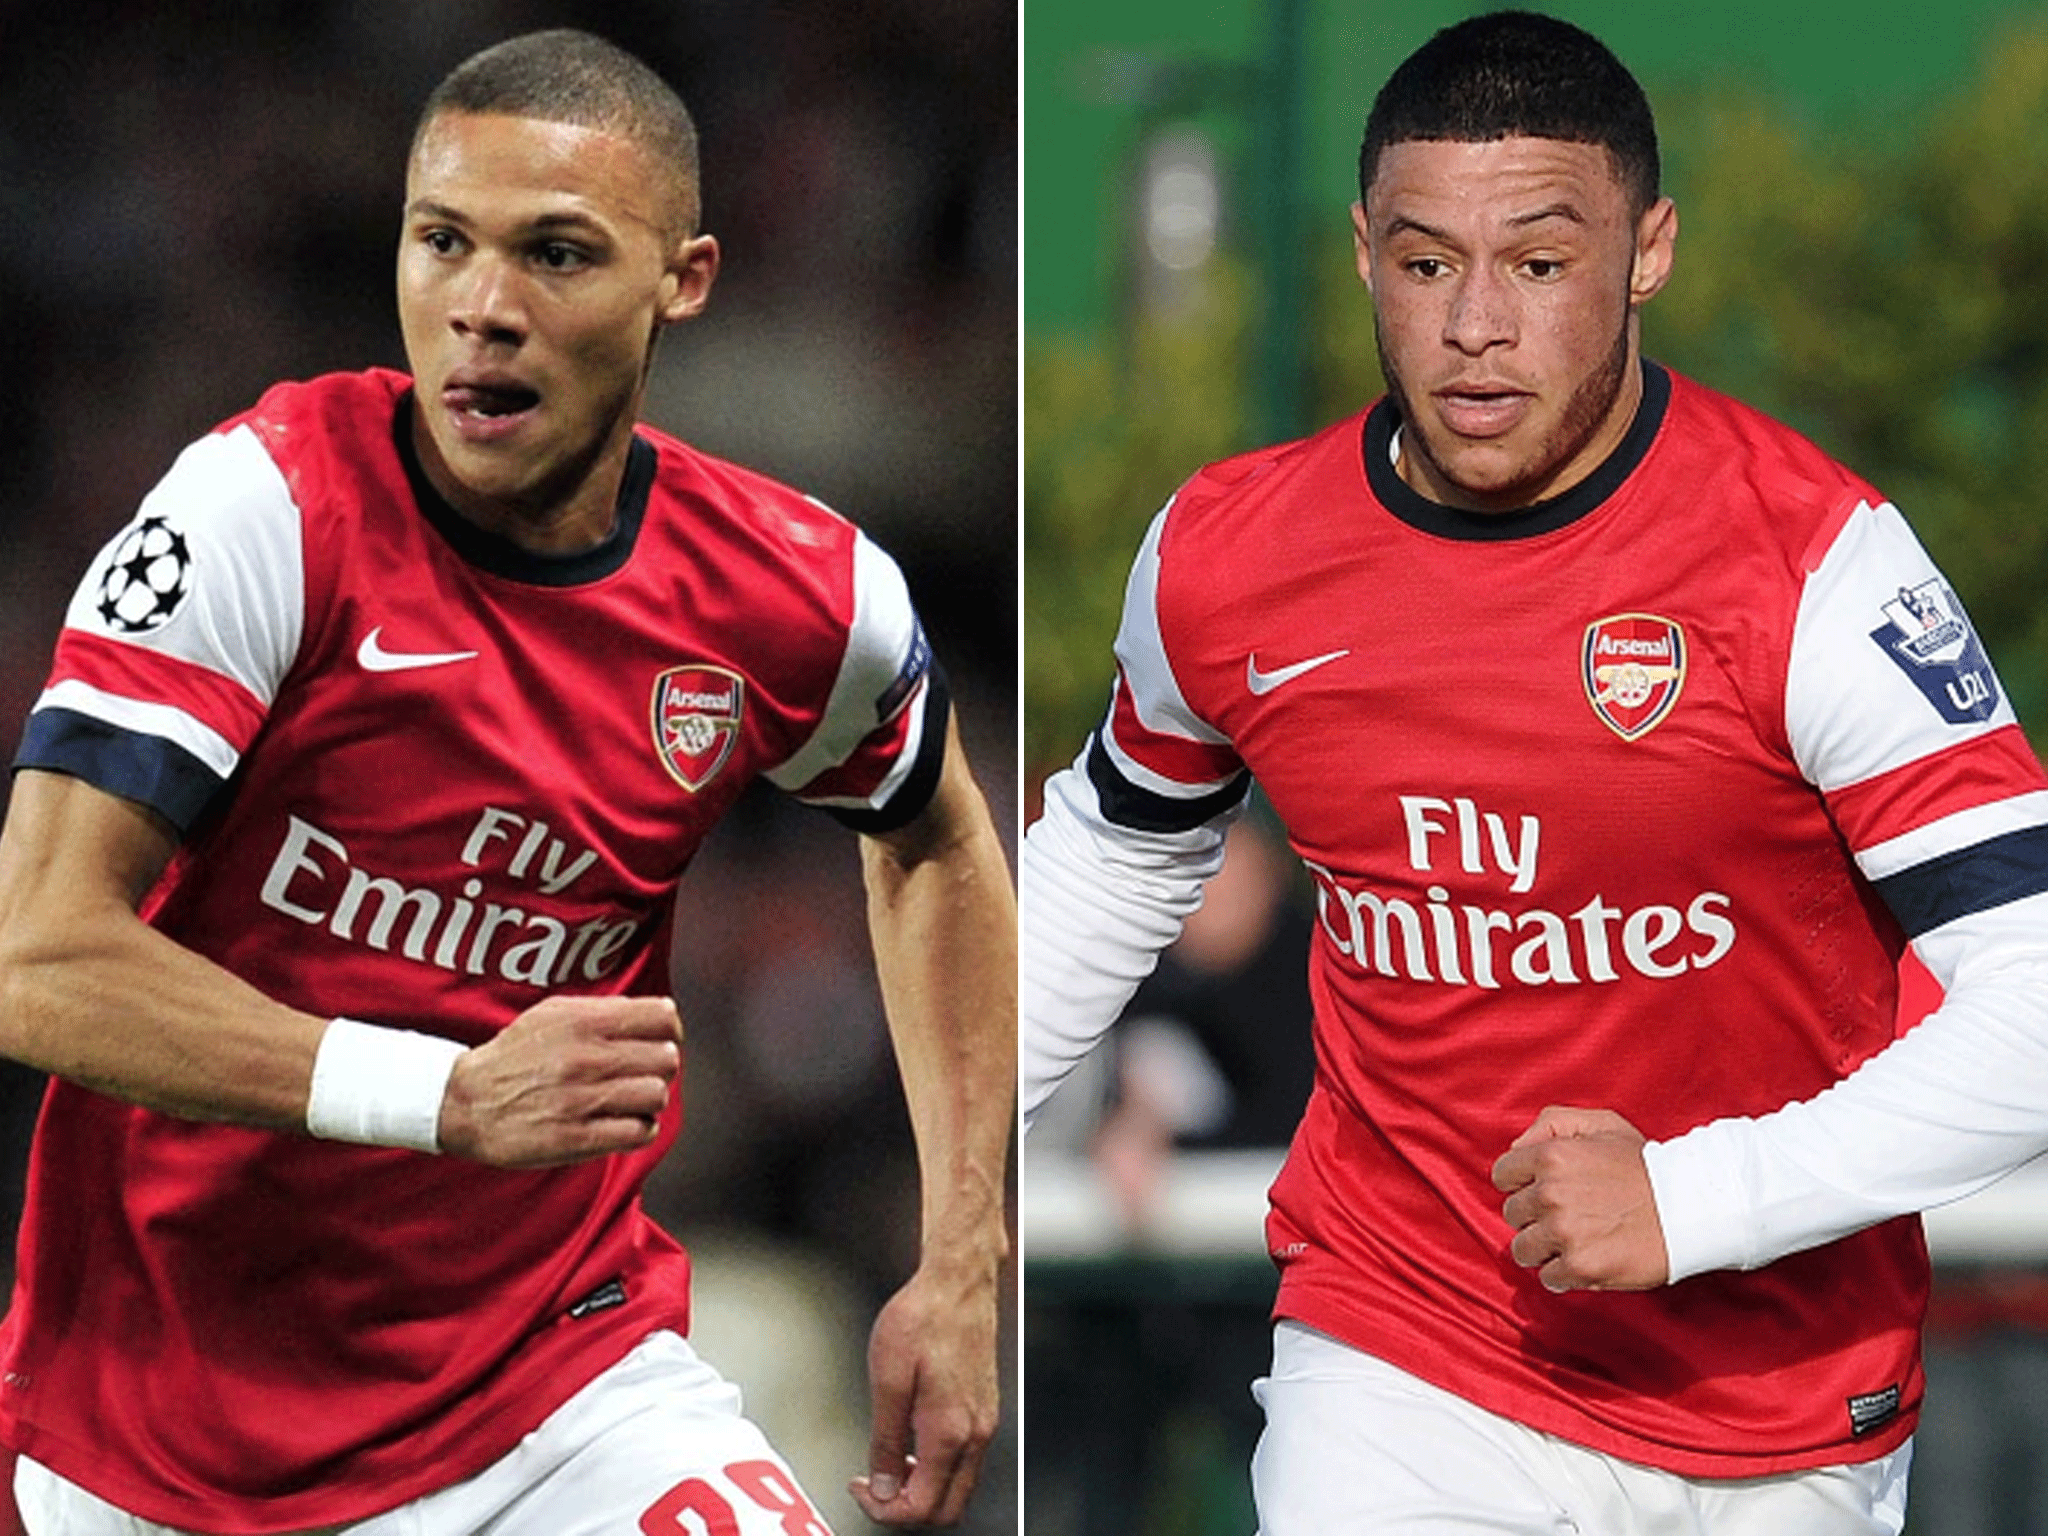 No ban for either Kieran Gibbs (left) or Alex Oxlade-Chamberlain over wrong red card